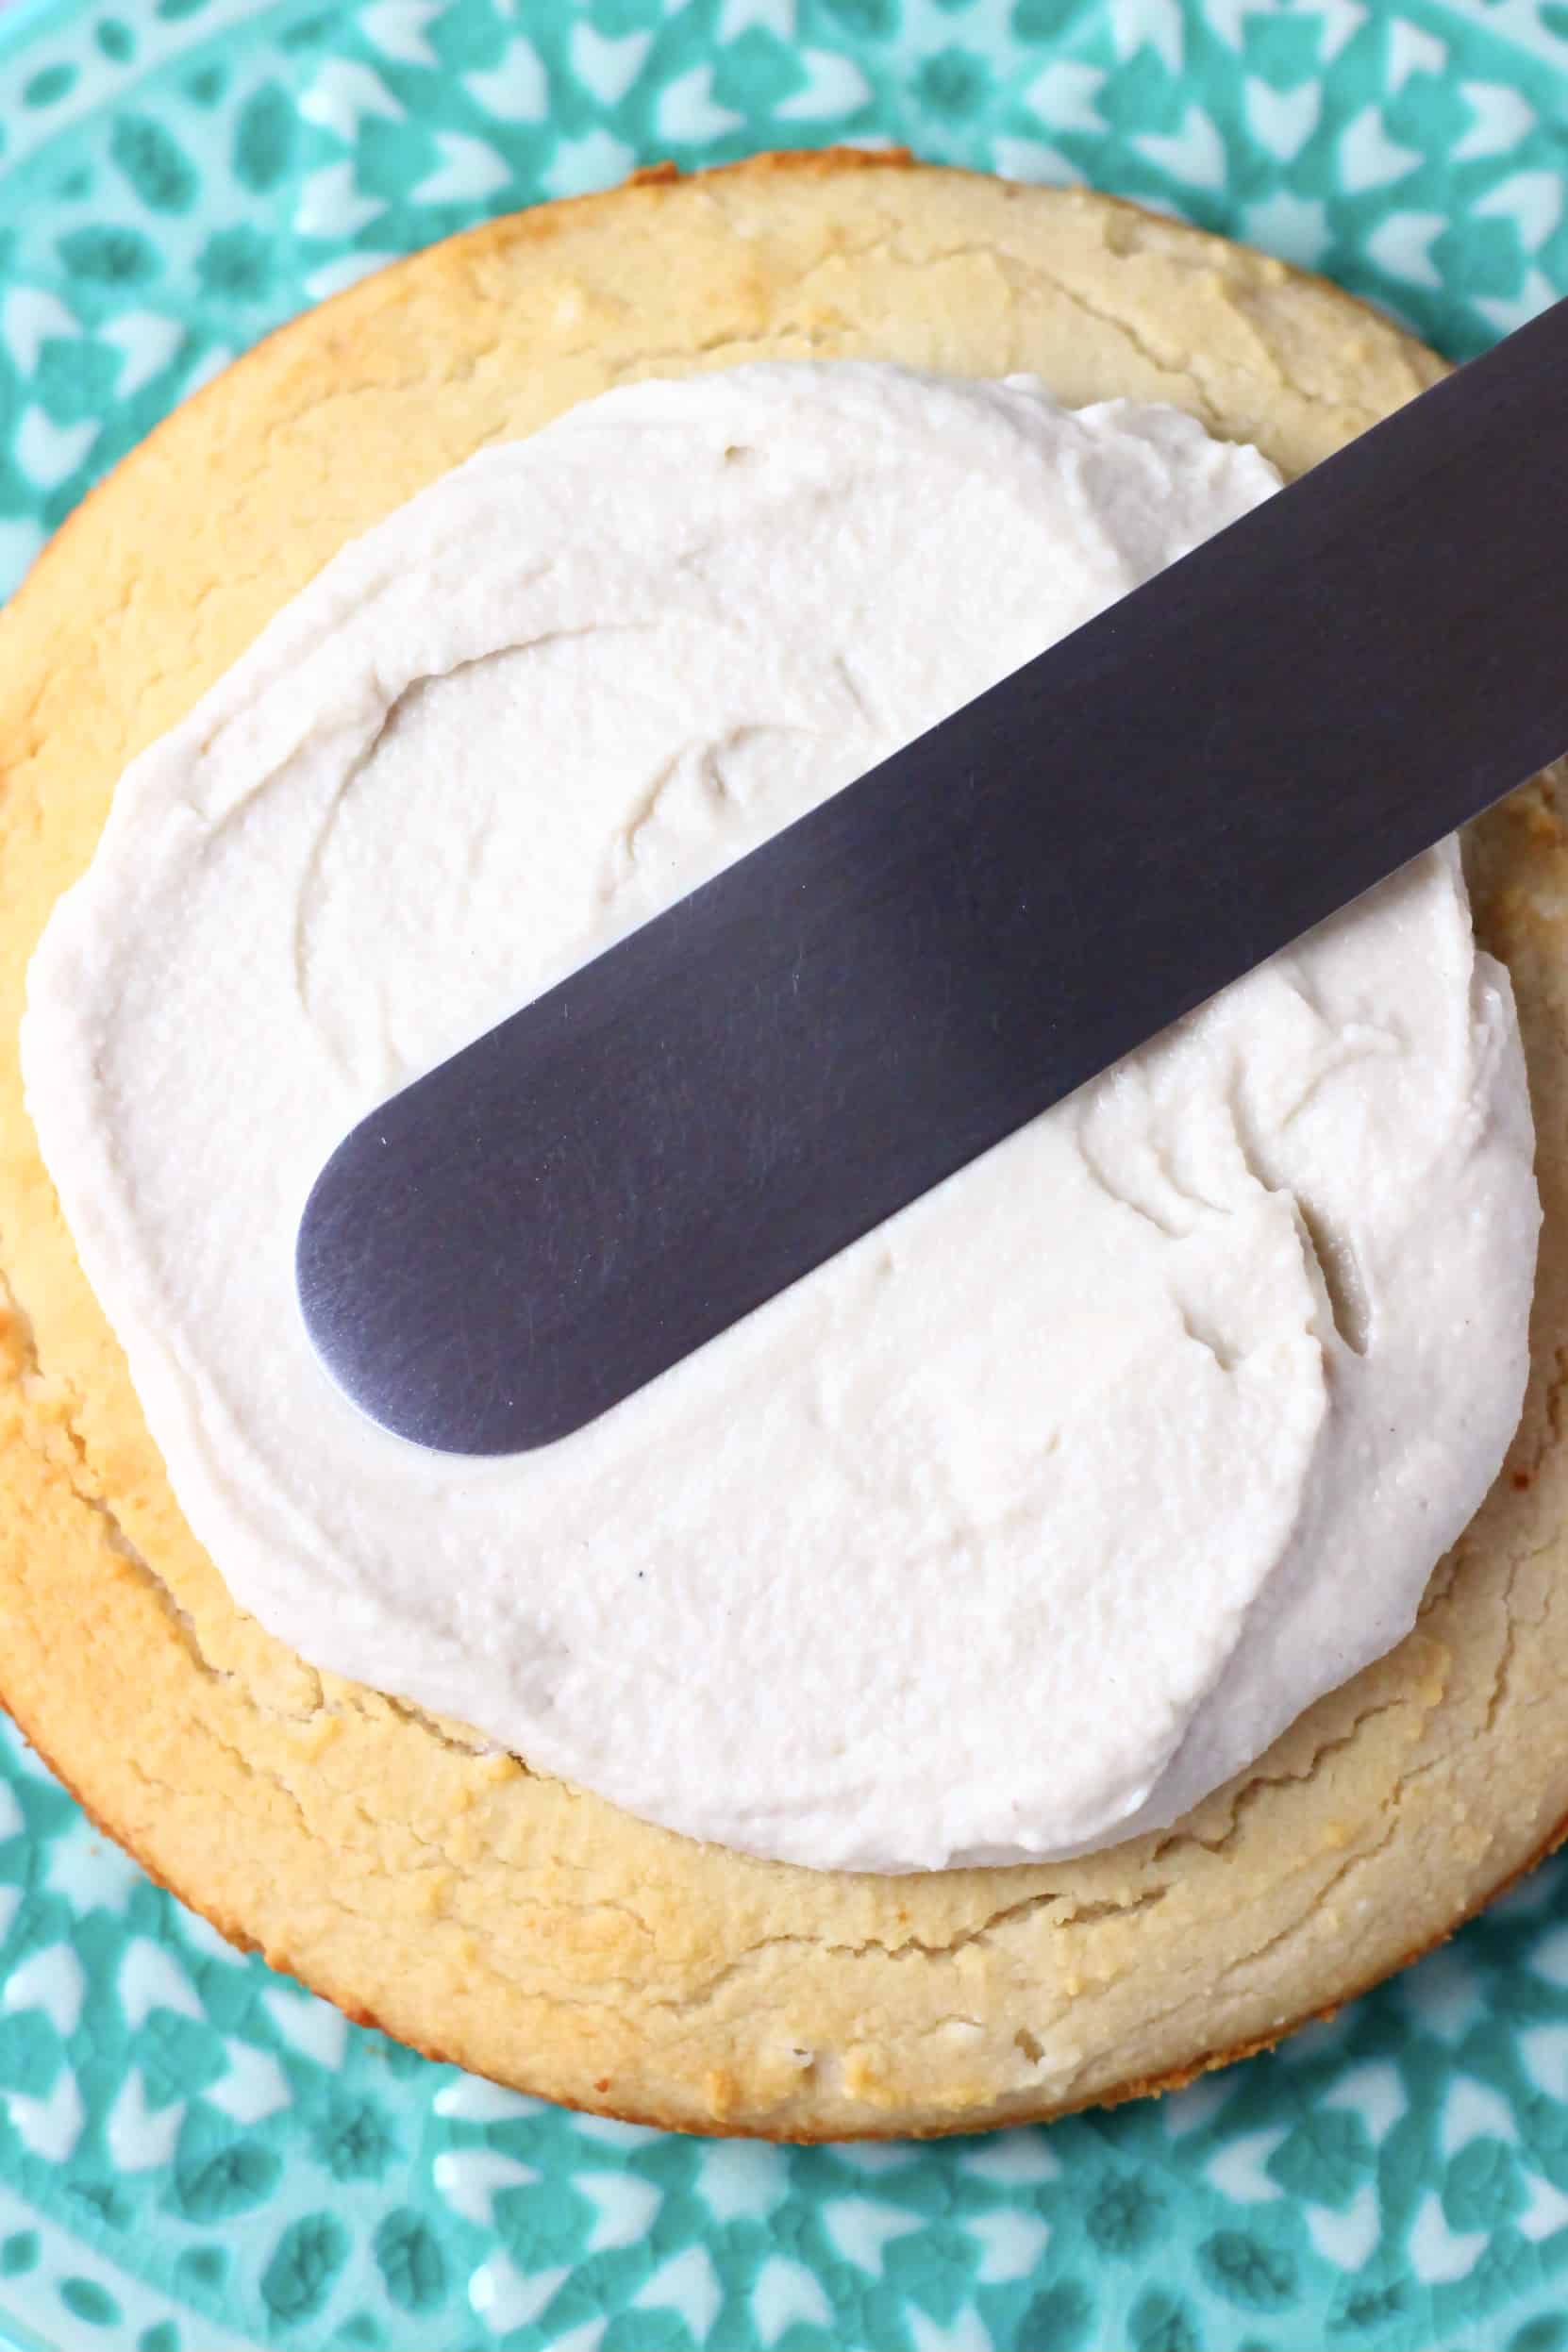 A gluten-free vegan vanilla cake sponge on a cake stand being spread with vegan buttercream frosting using a palette knife